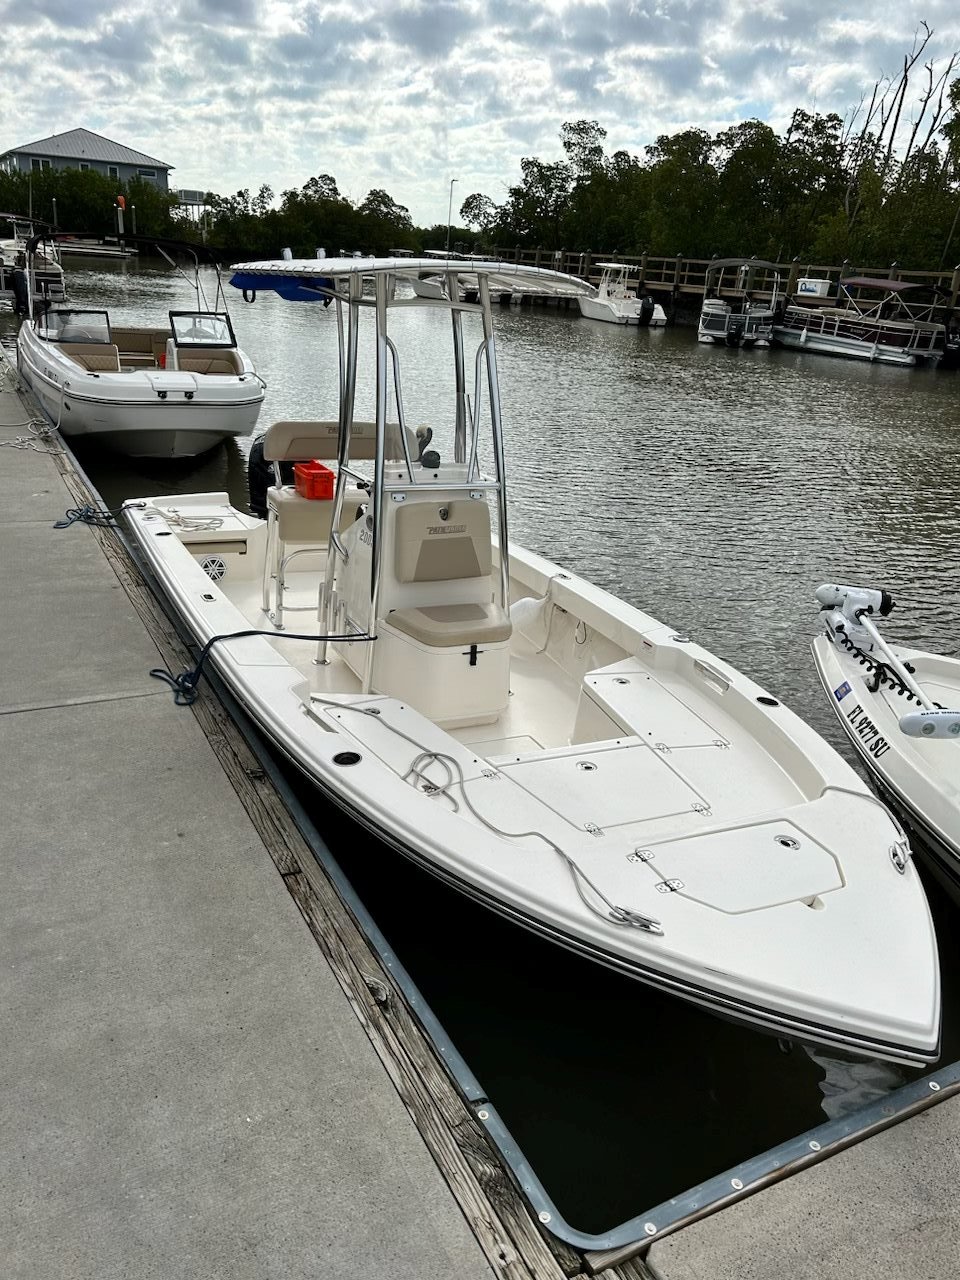 PEARL JAM (2OFT Center Console Pathfinder 150 HP Fishing